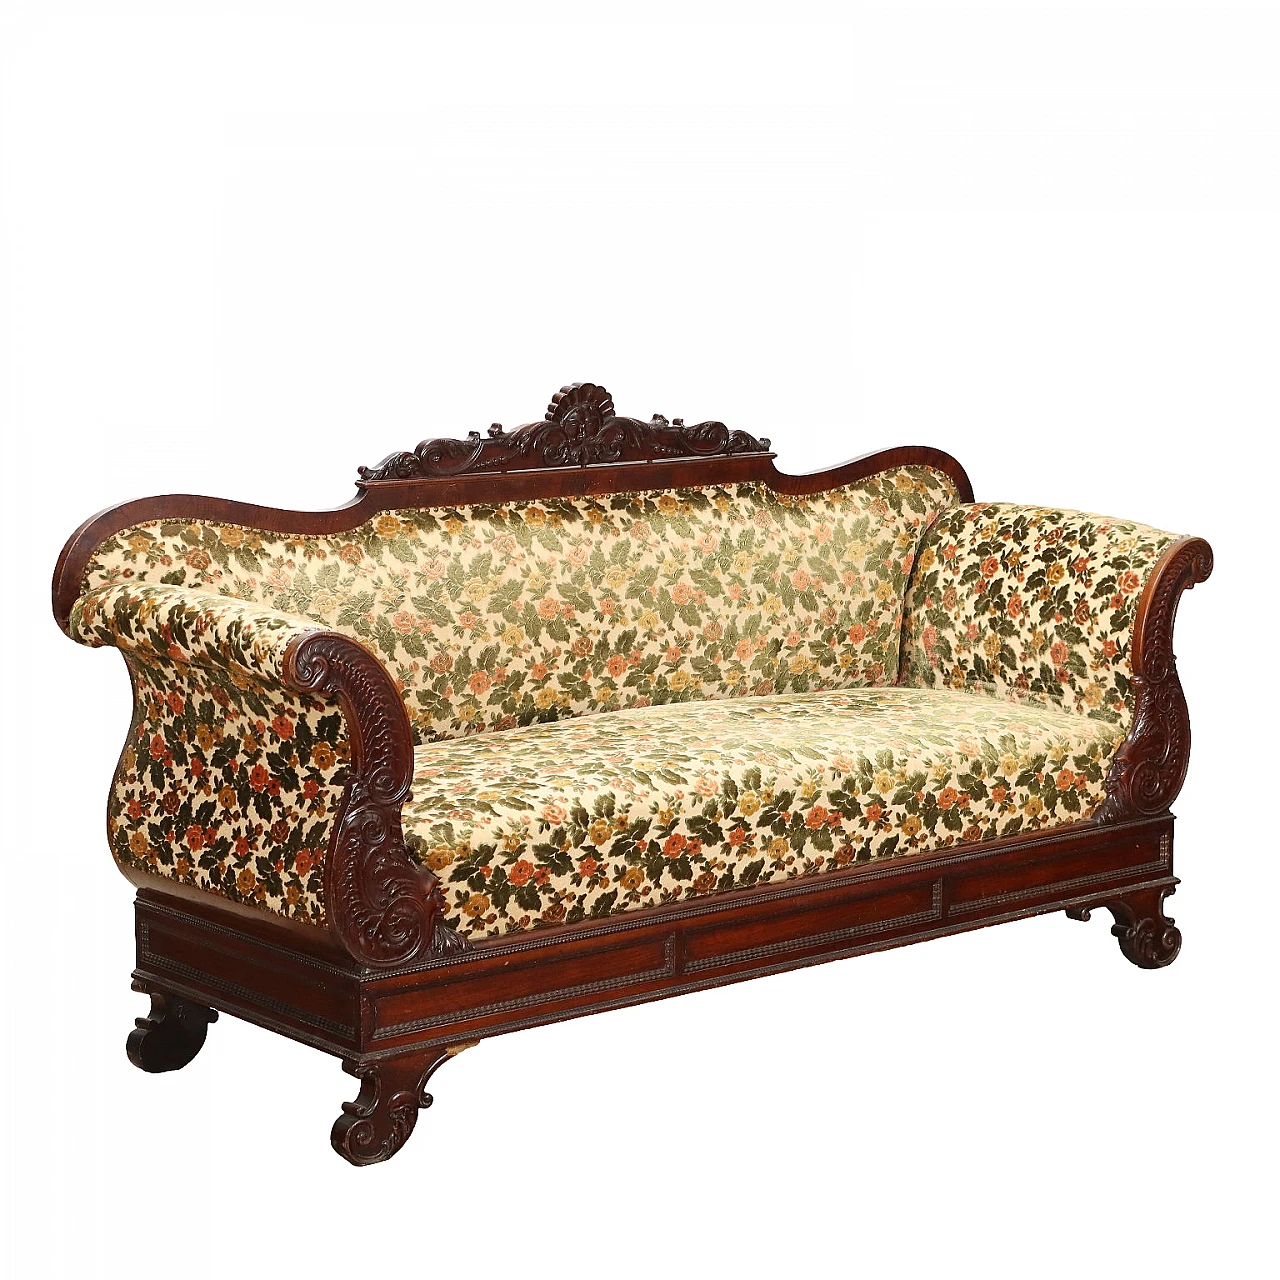 Mahogany sofa with carved leaf motifs and floral fabric, 19th century 1